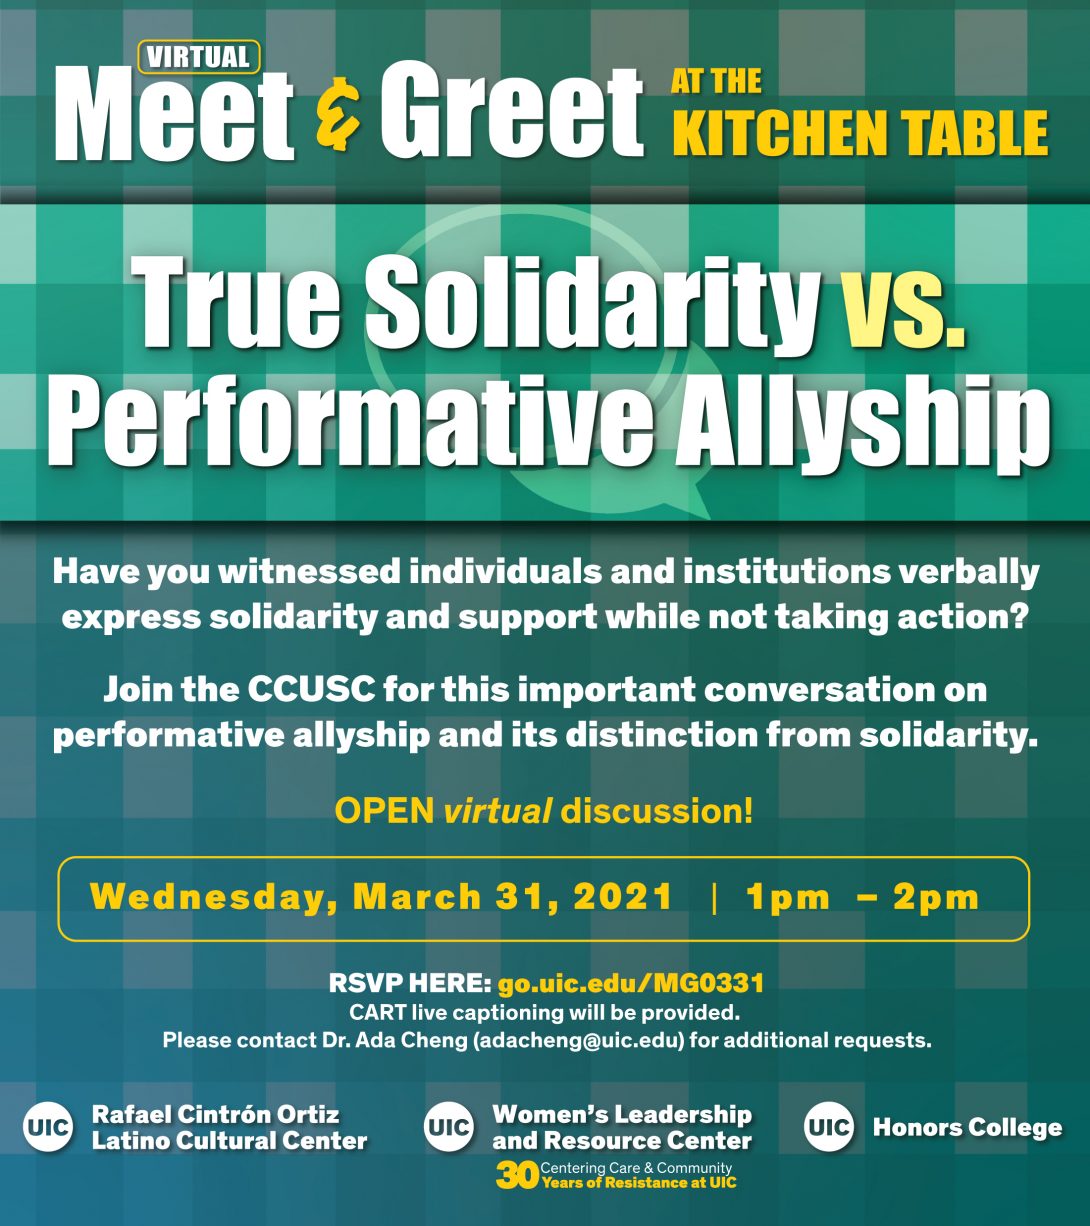 The color for the flyer is green. At the top, Meet & Greet in white, at the Kitchen Table in yellow. In the middle is True Solidarity vs. Performative Allyship and event details in white. At the bottom are the three co-sponsors in white.